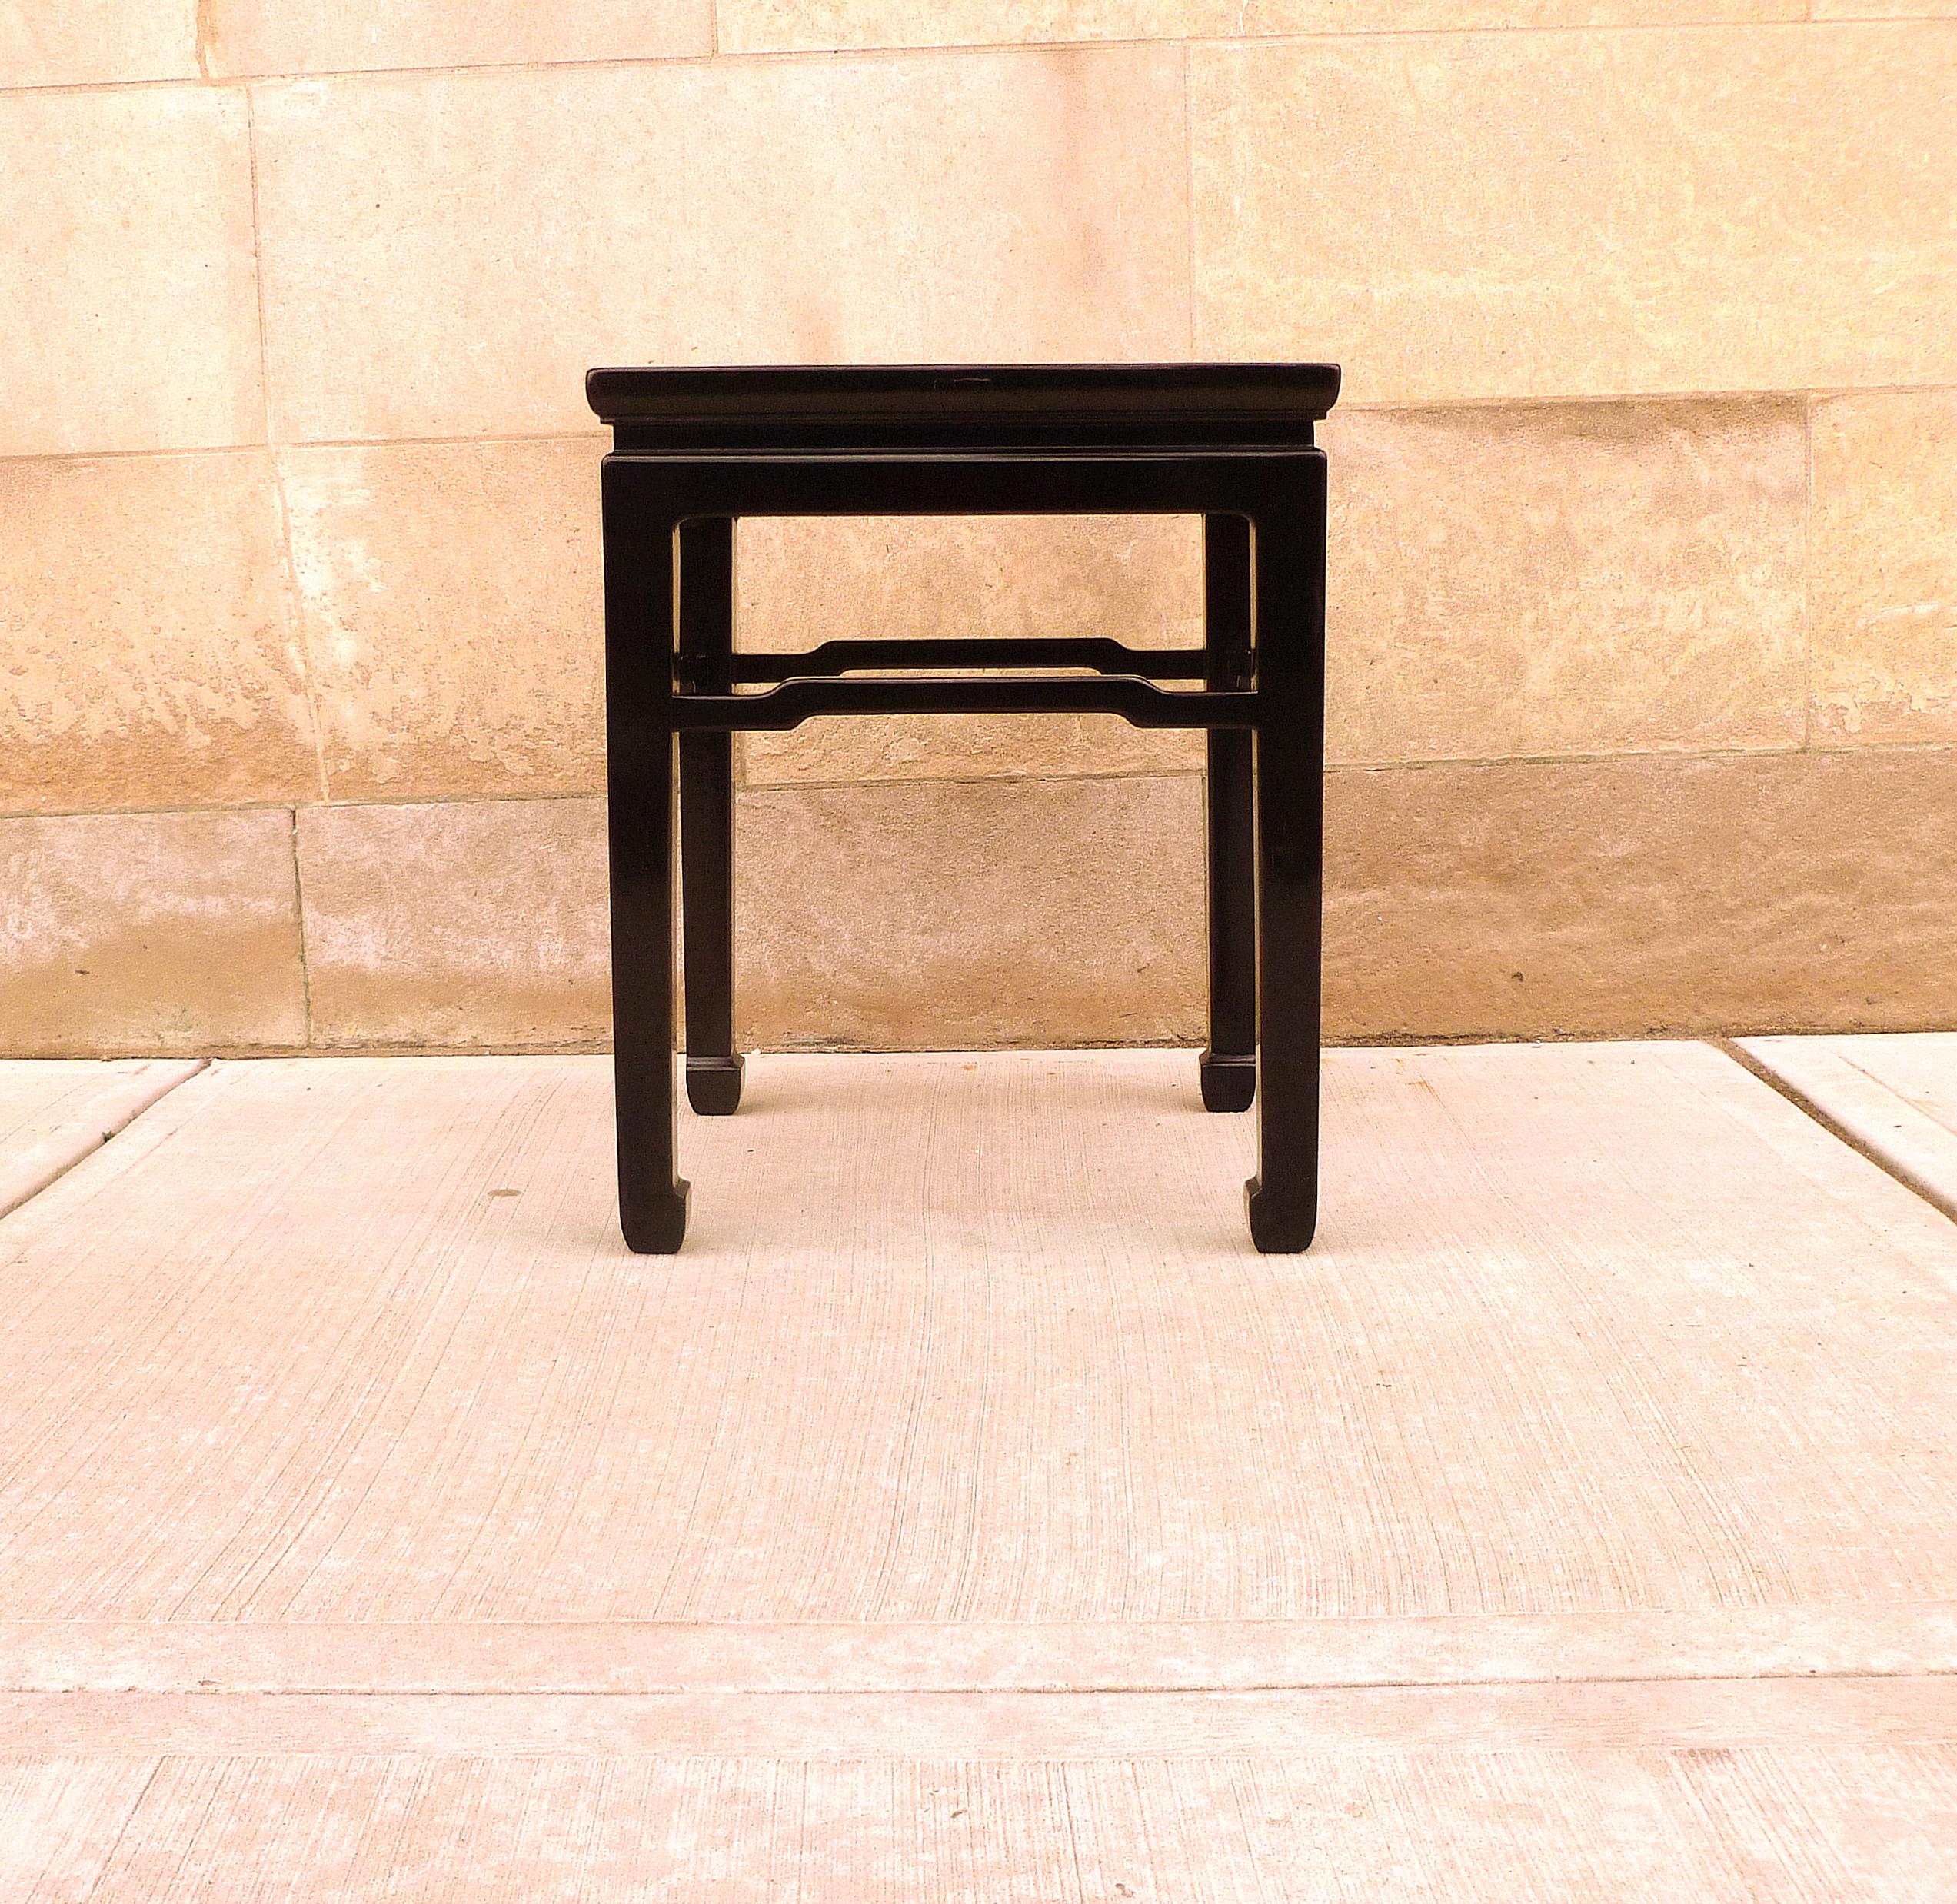 An elegant black lacquer square end table, beautiful color, form and lines. We carry fine quality furniture with elegant finished and has been appeared many times in 